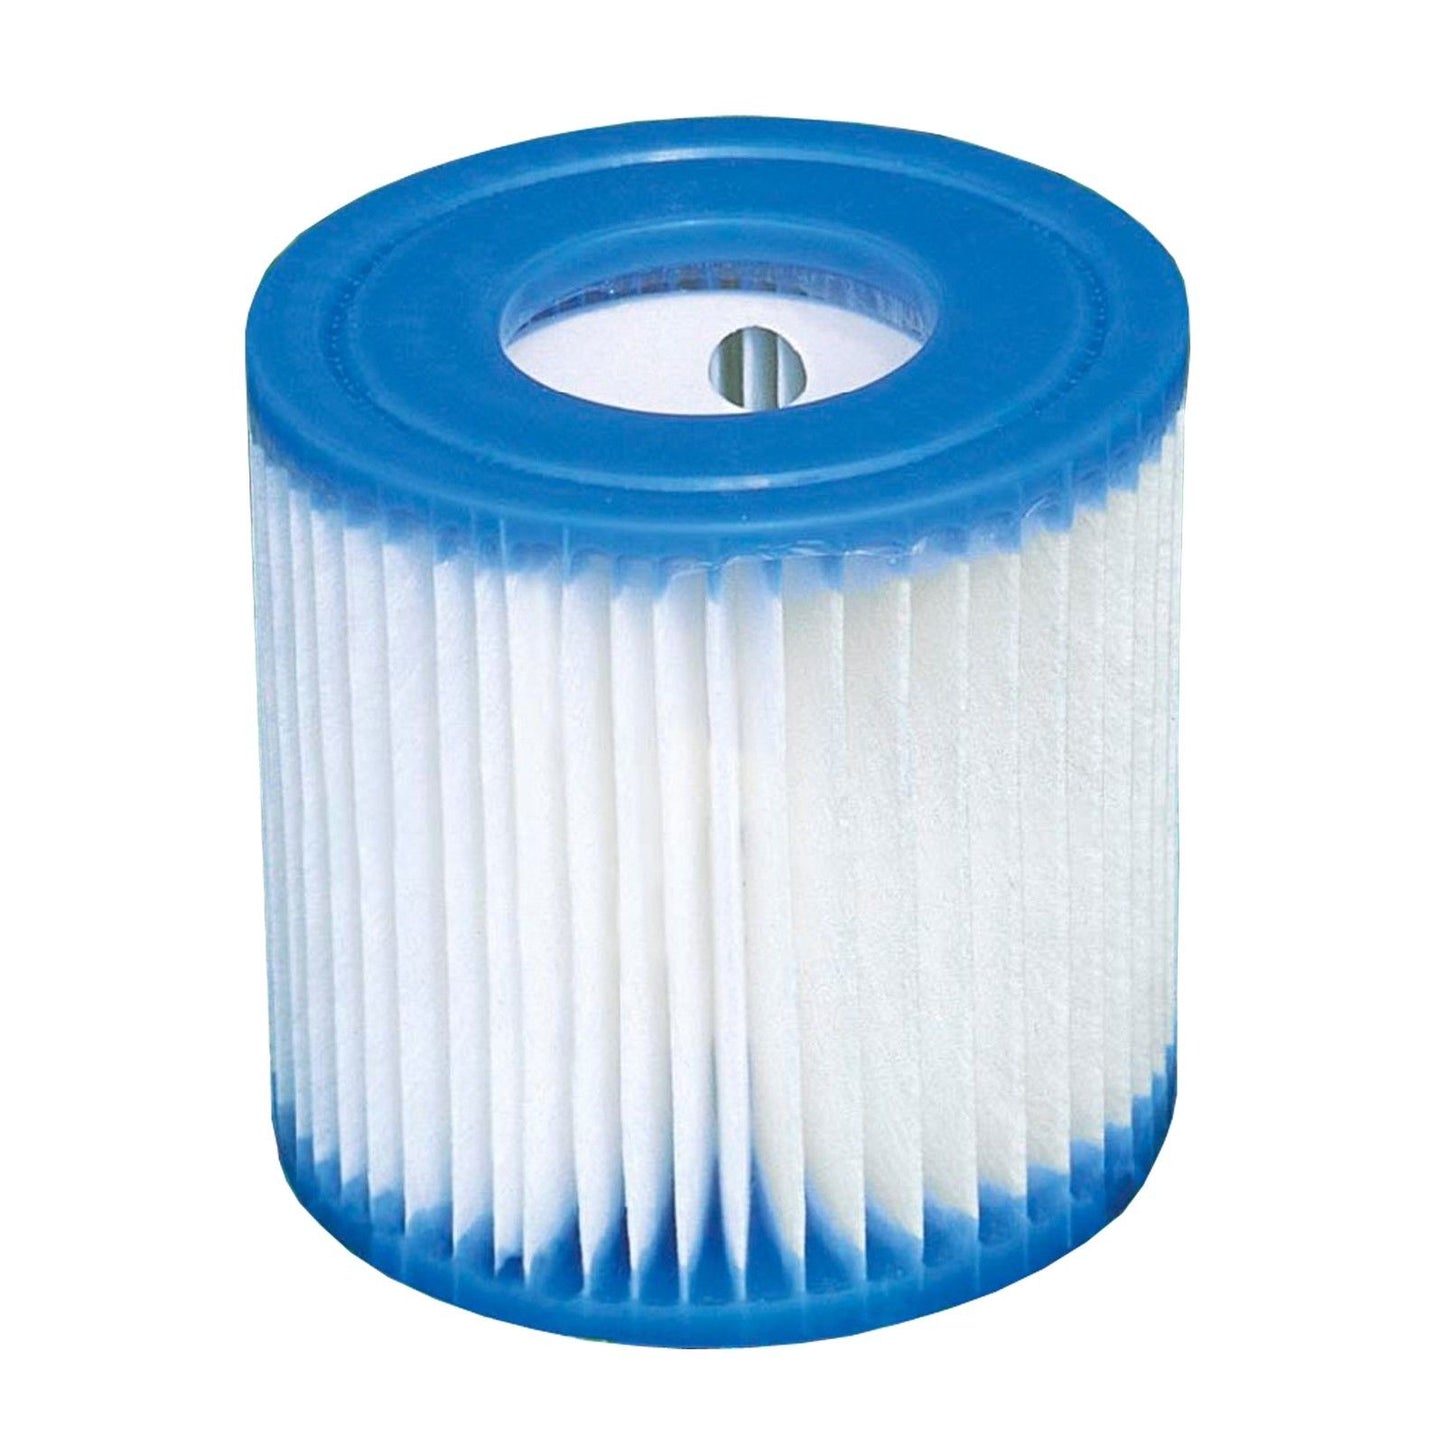 Intex Type H Filter Cartridge for Above Ground Swimming Pool Pumps 2 Pack